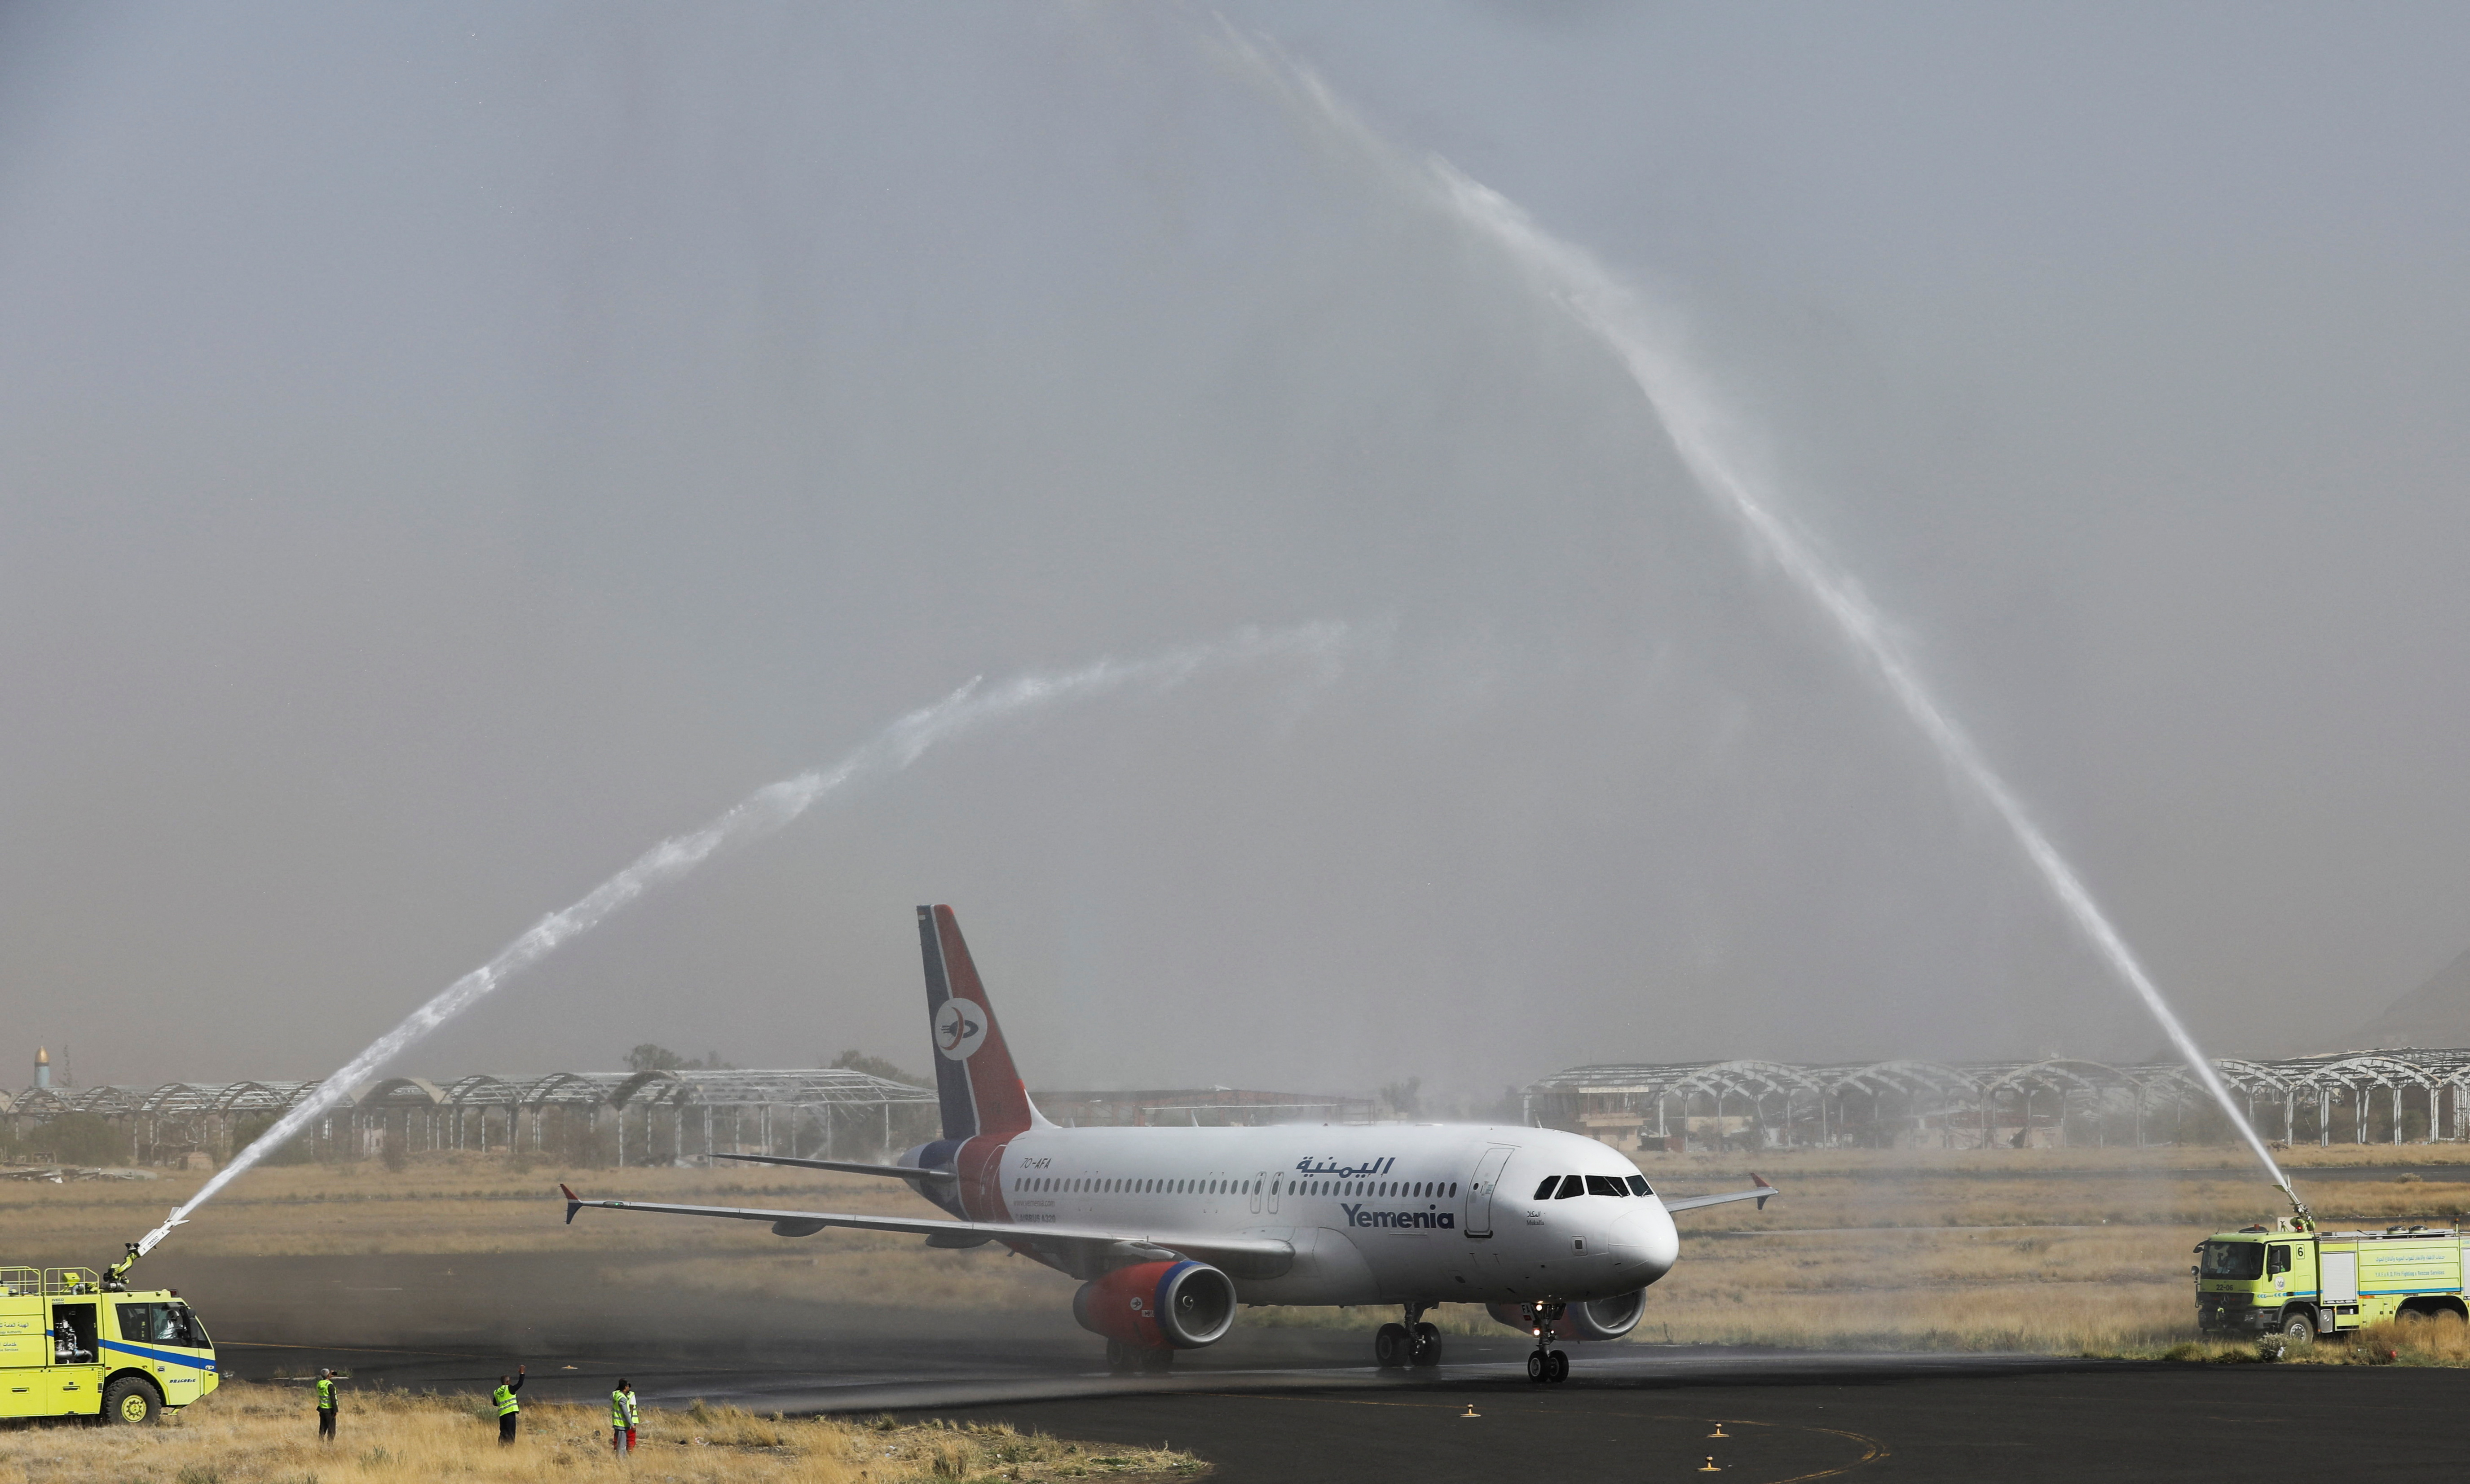 Yemen Airways plane is greeted with water canon salute at Sanaa Airport as the first commercial flight in around six years, in Sanaa